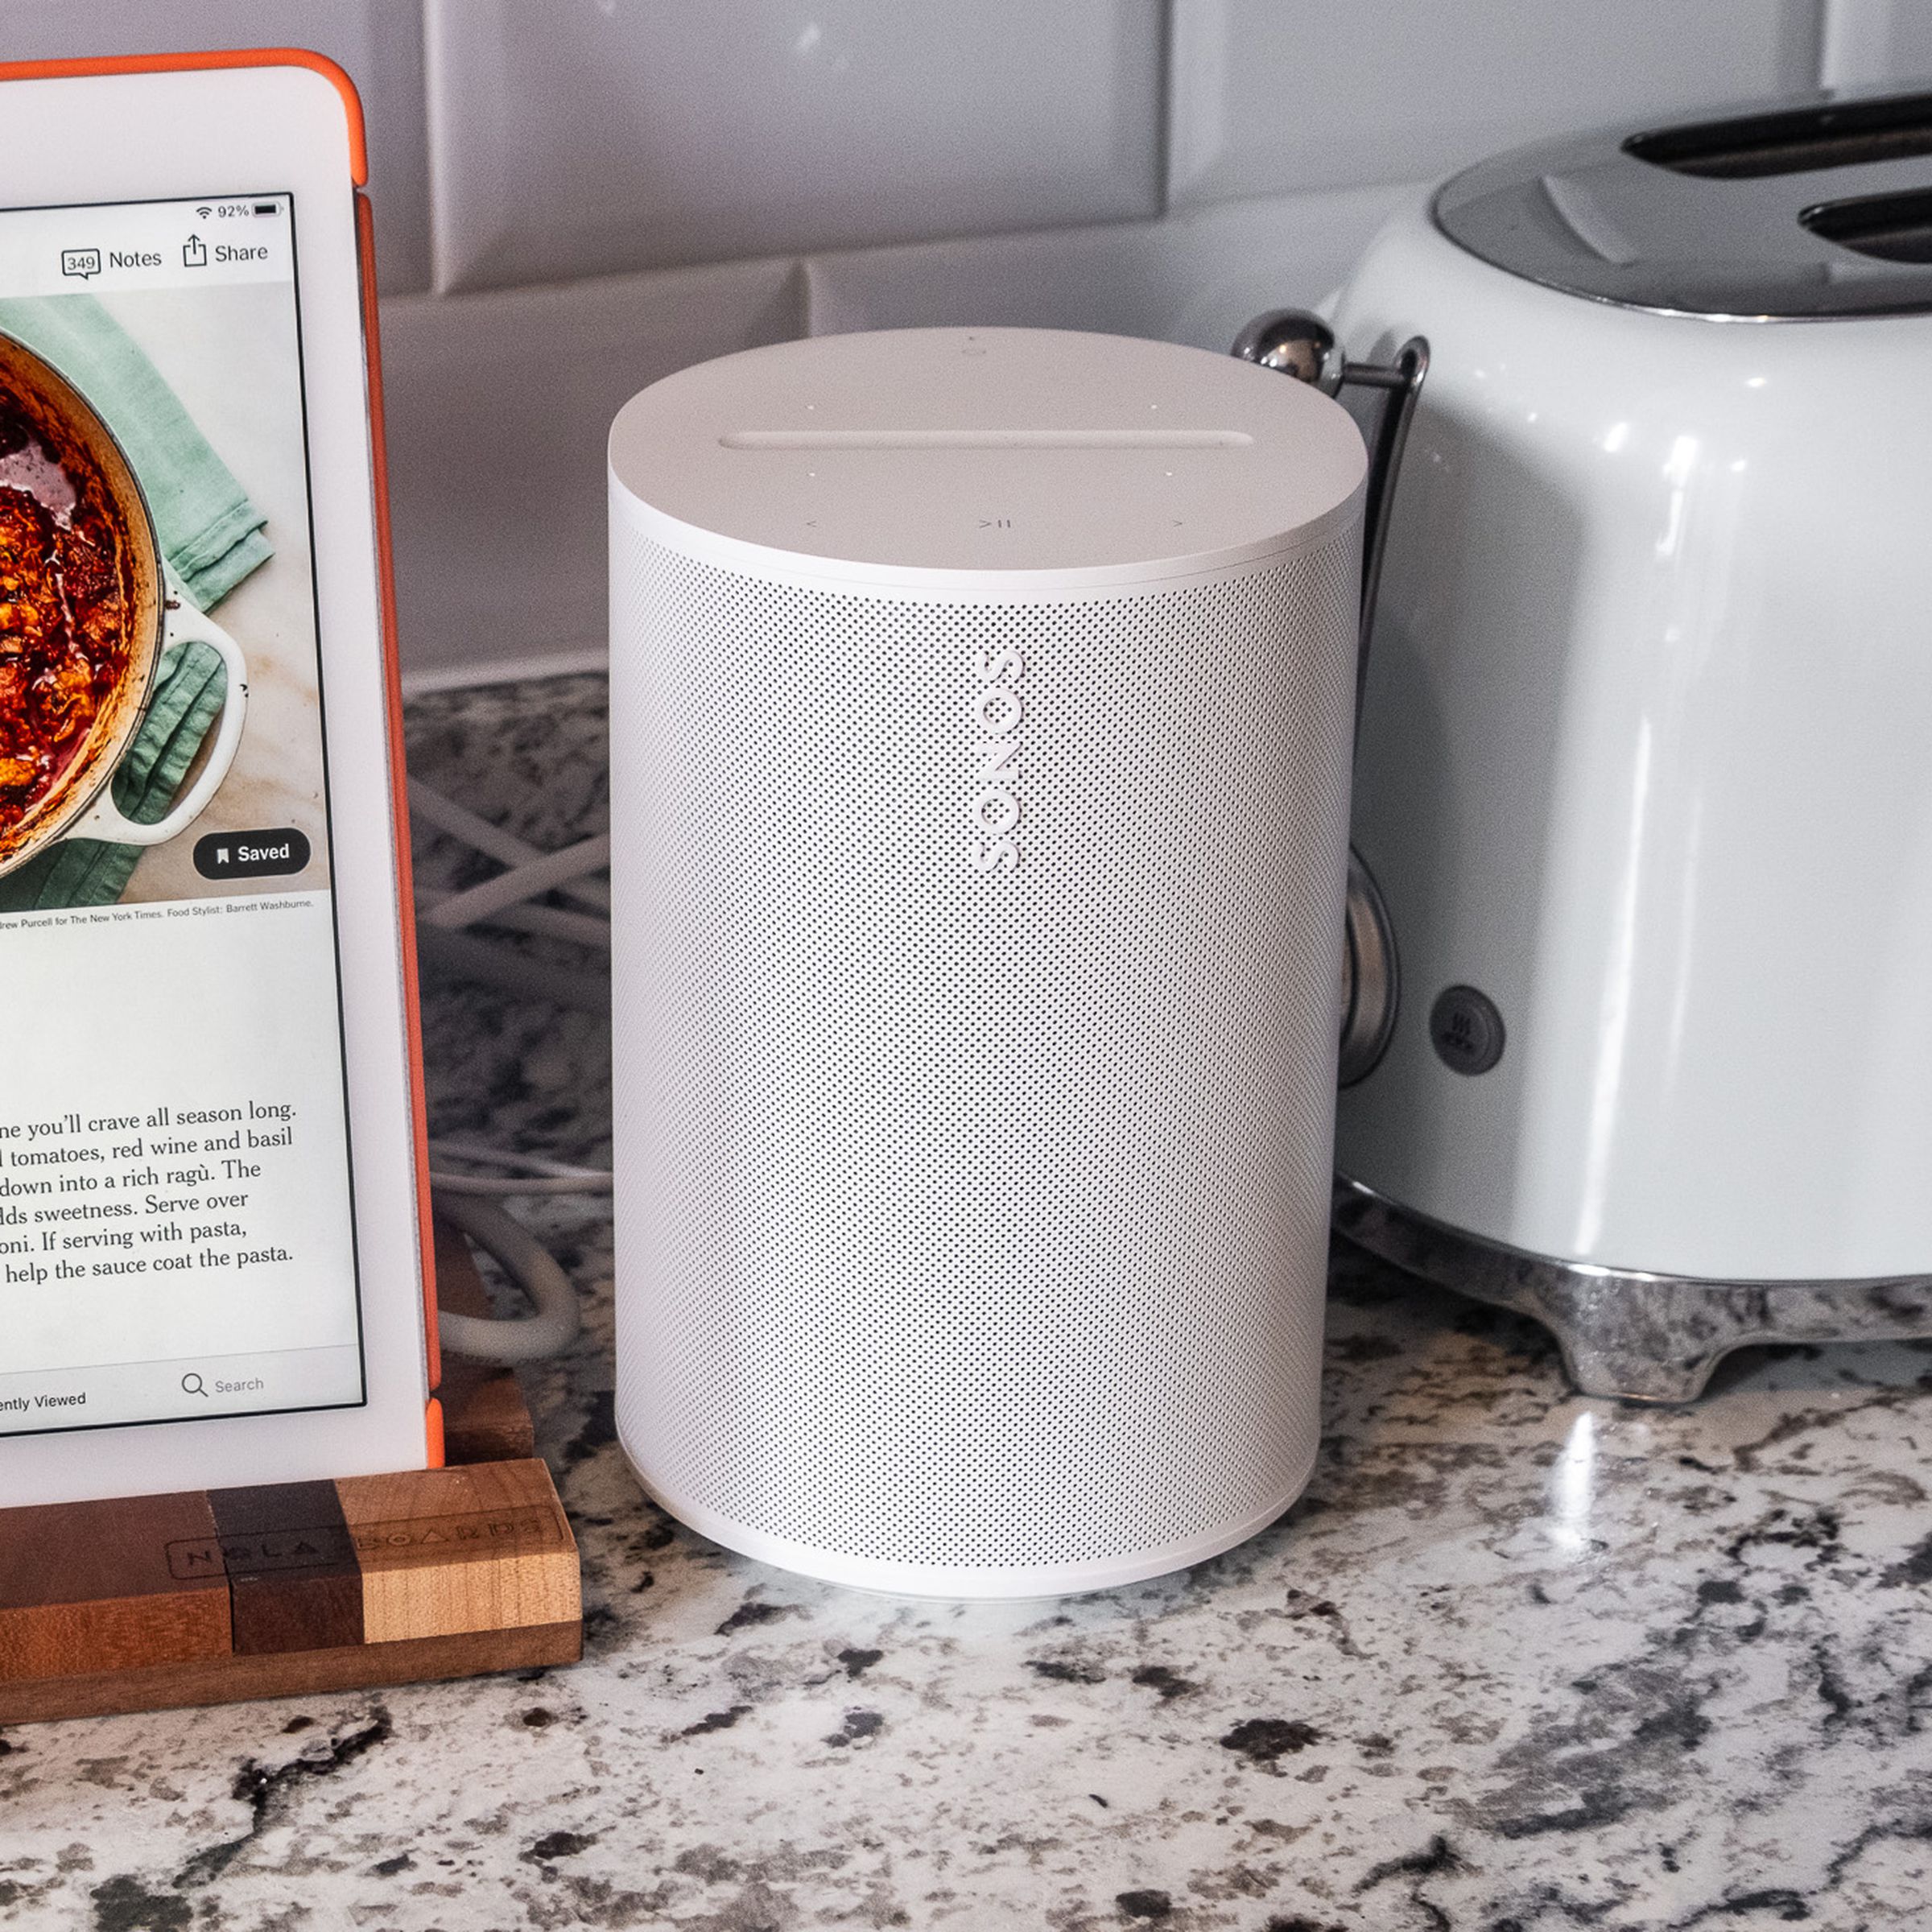 A photo of the Sonos Era 100 speaker in a kitchen setting beside an iPad and toaster.